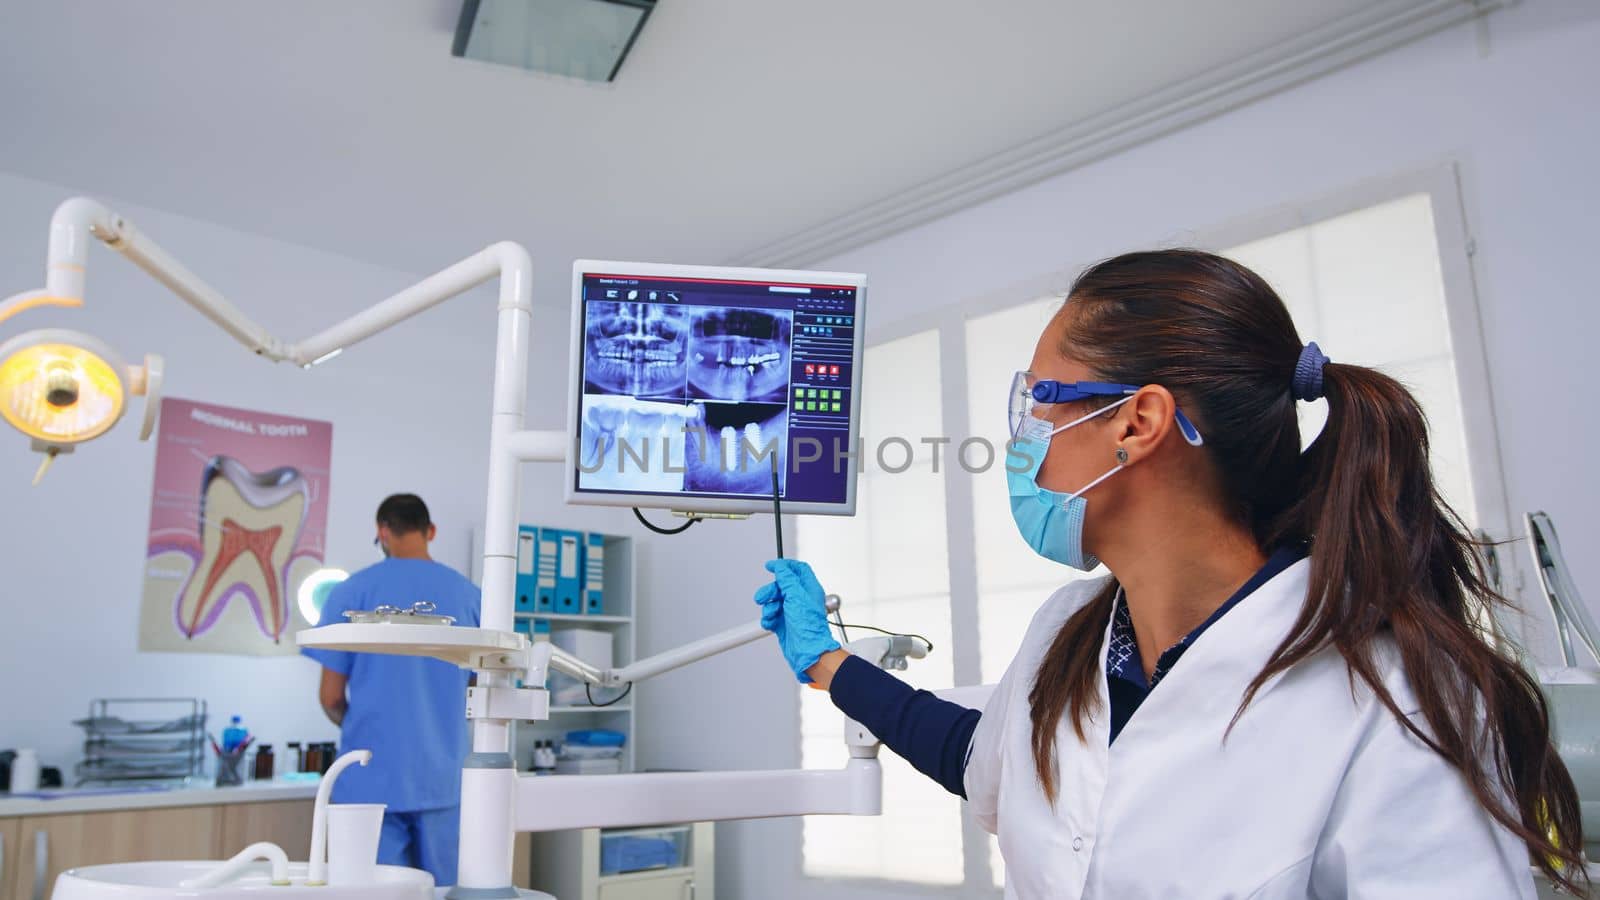 Dentistry doctor talking about dental surgery showing x-ray on monitor unit, patient pov. Stomatology specialist wearing protective face mask pointing at teeth radiography in stomatological clinic